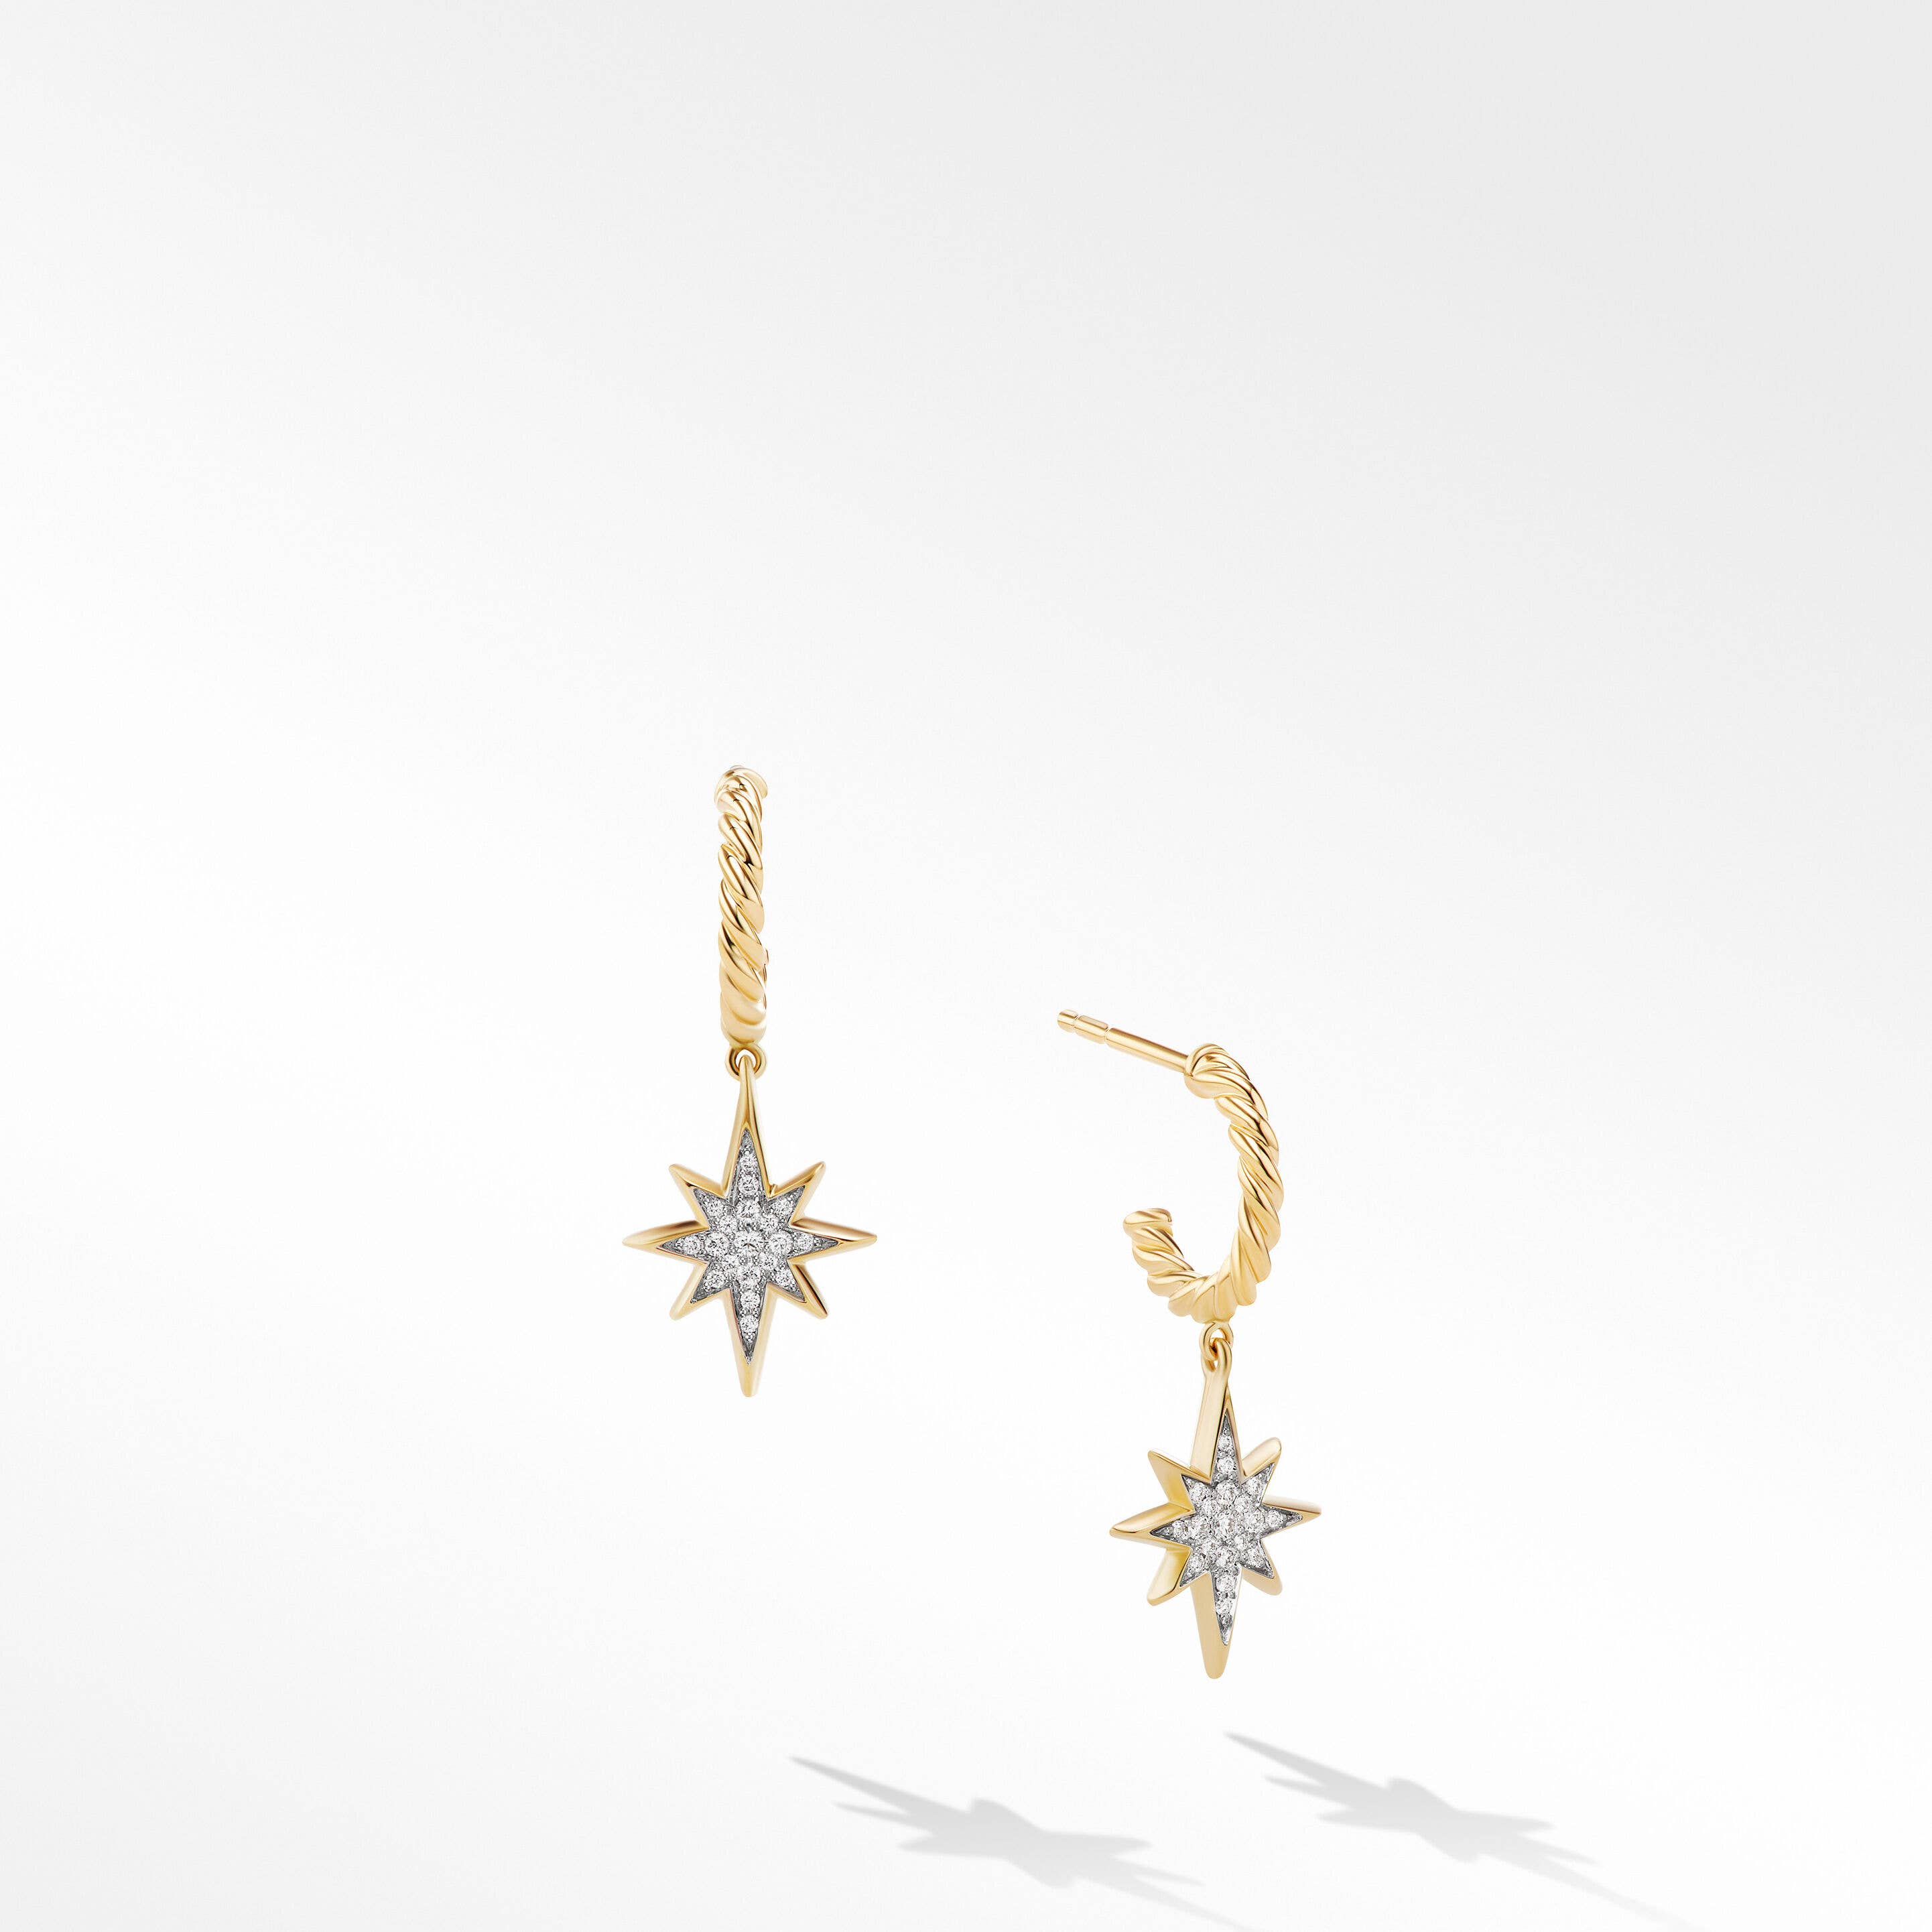 Cable Collectibles® North Star Drop Earrings in 18K Yellow Gold with Pavé Diamonds